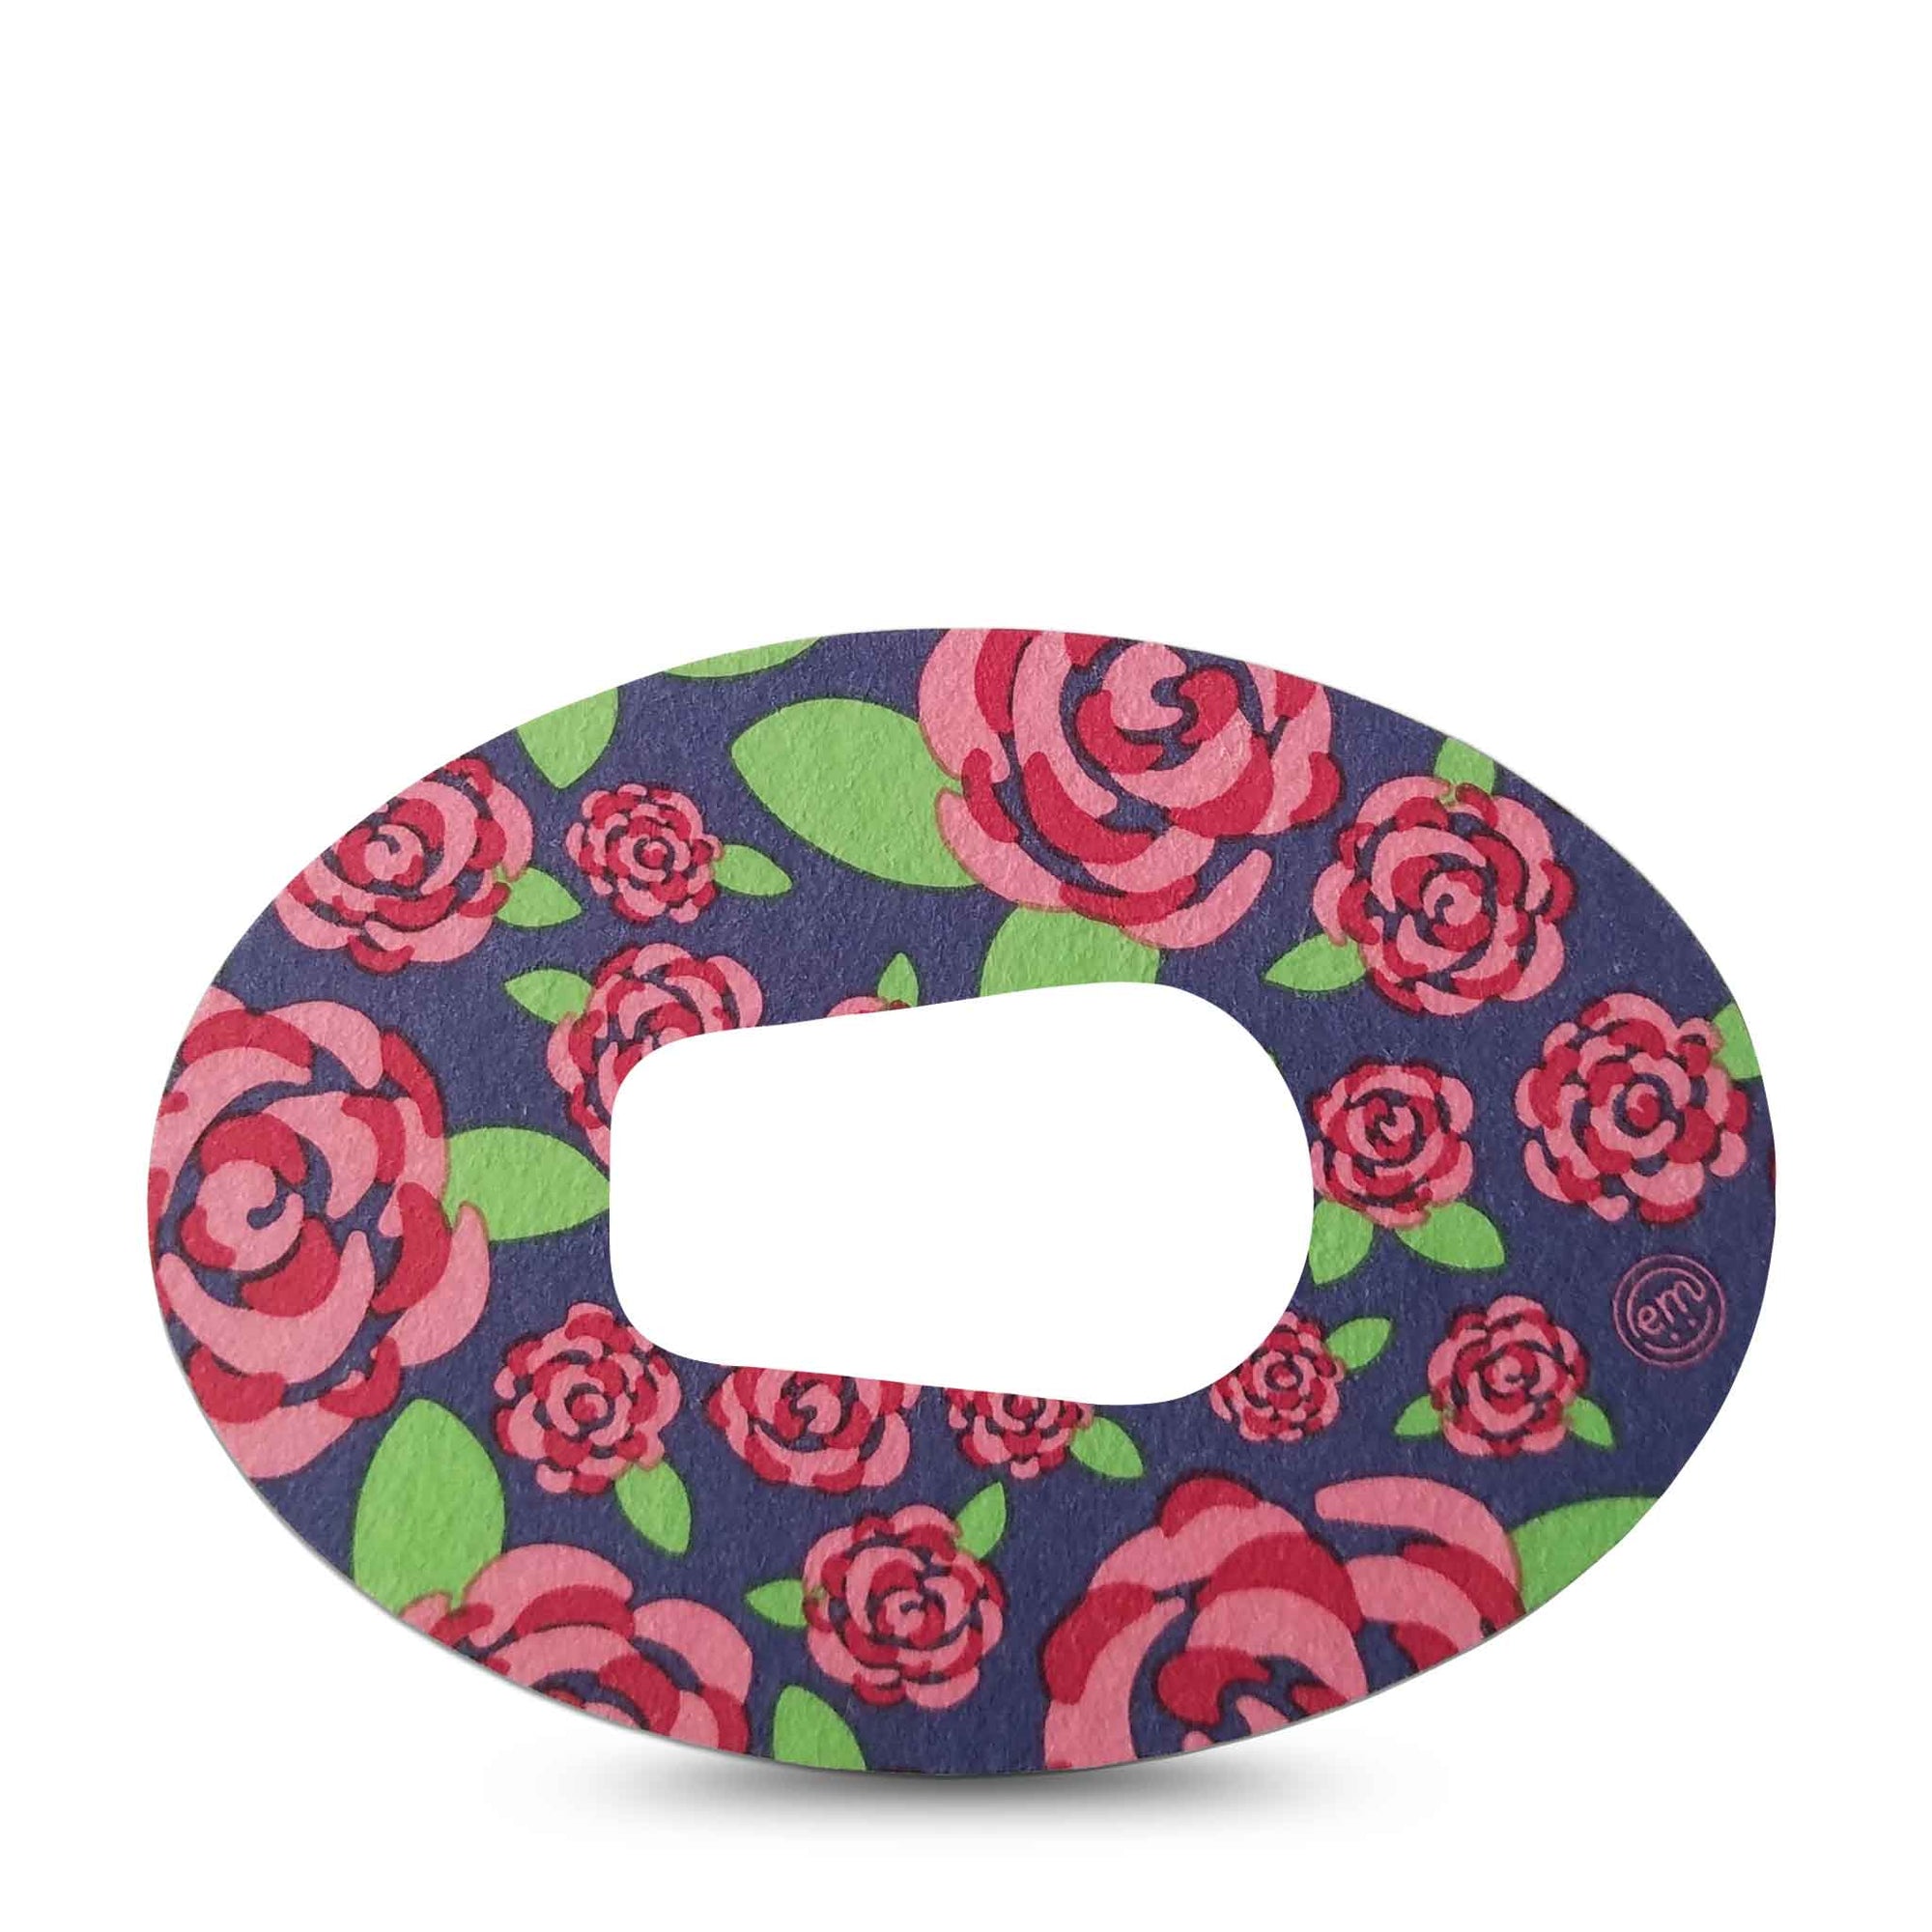 ExpressionMed Pretty Pink Roses Dexcom G6 Wide Tape